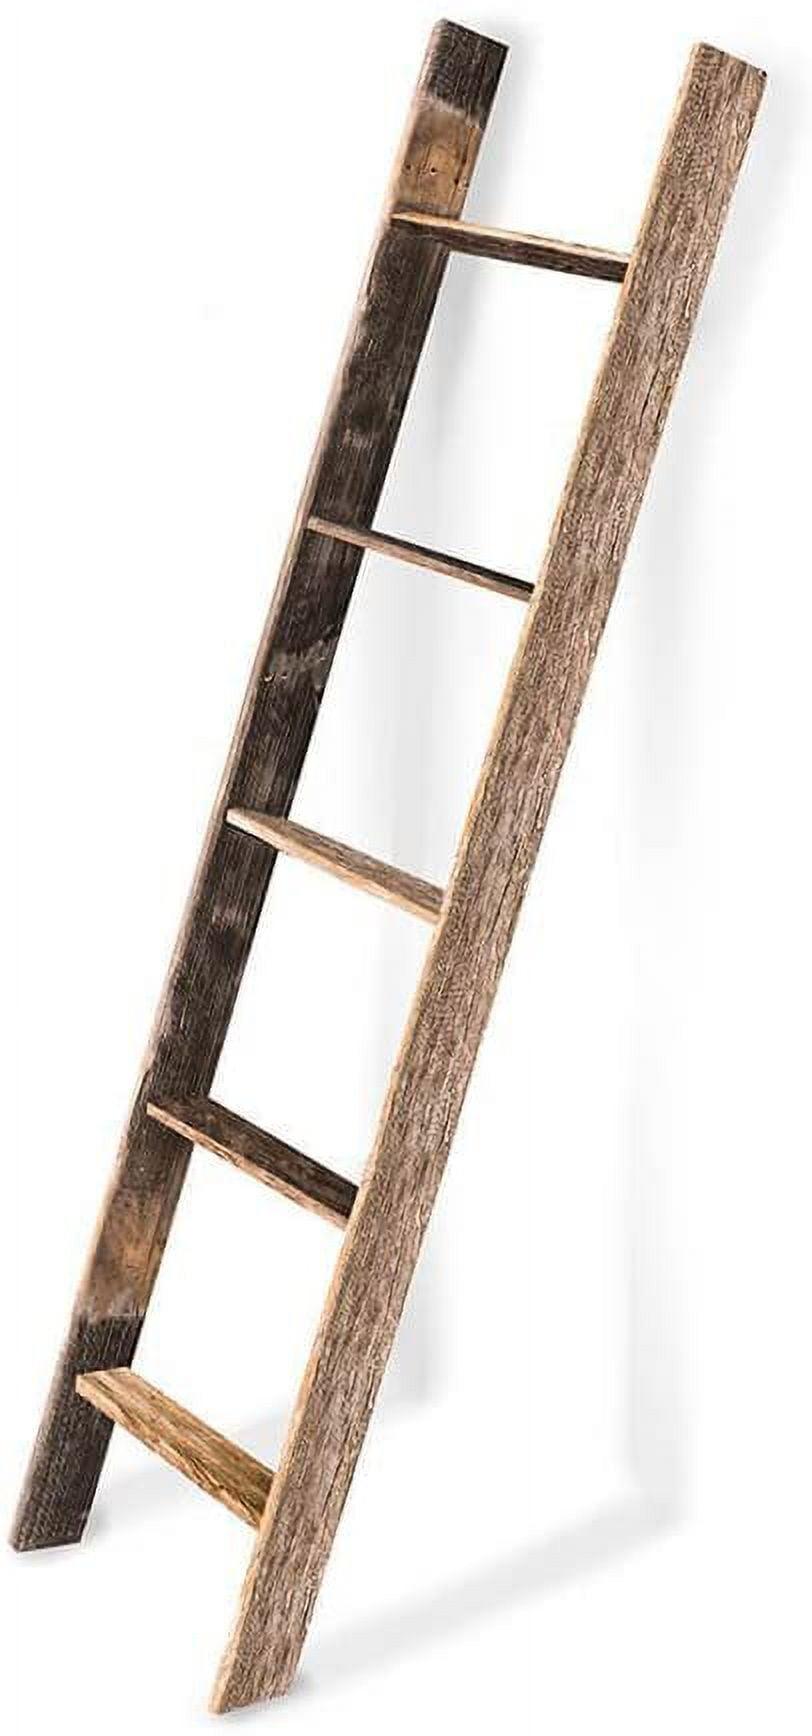 Rustic 5ft Weathered Gray Reclaimed Wood Decorative Ladder